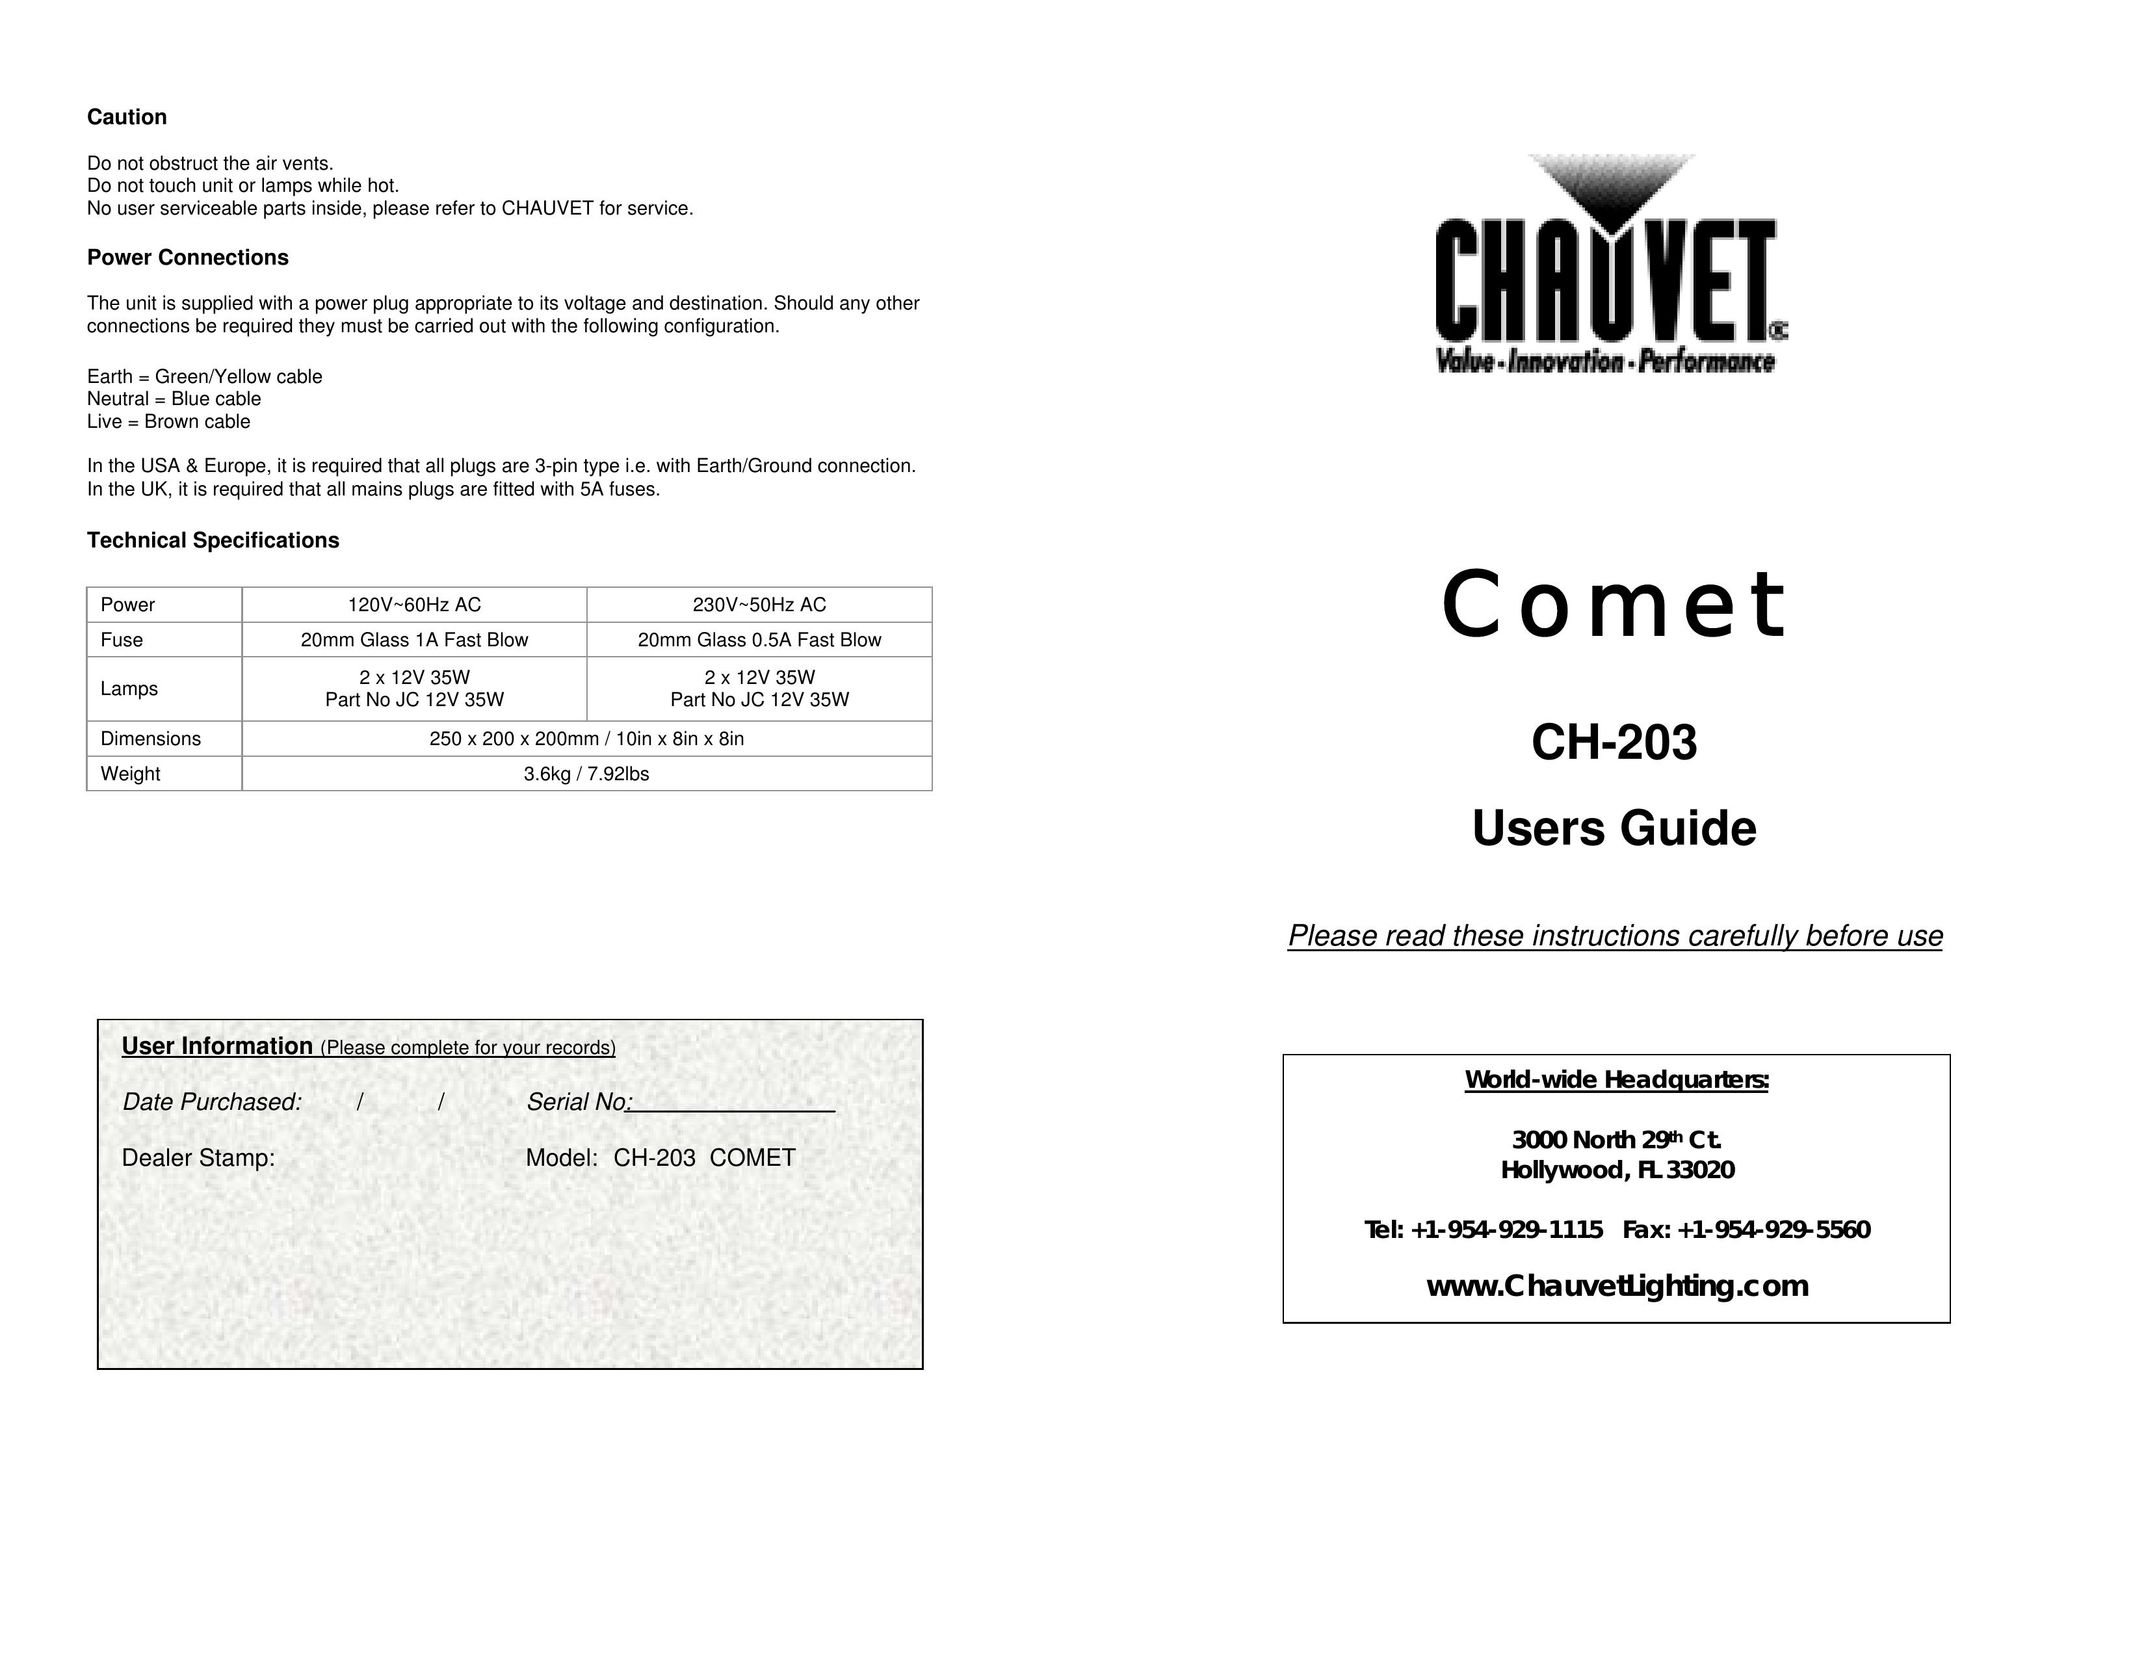 Chauvet CH-203 Indoor Furnishings User Manual